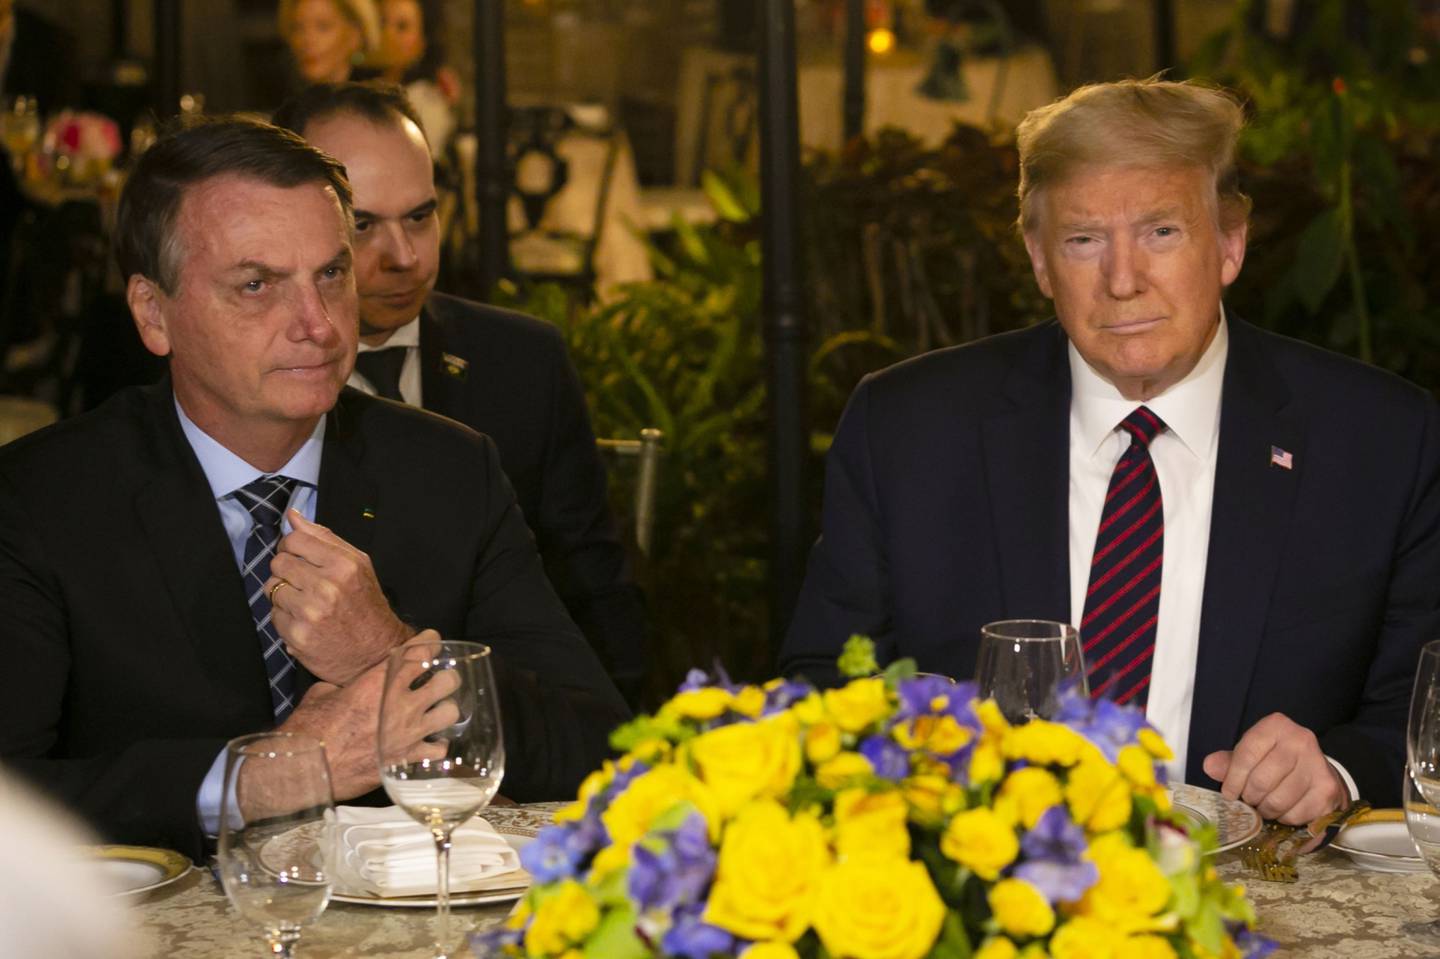 Former U.S. President Donald Trump, right, and Jair Bolsonaro, Brazil's former president, sit during a dinner at Mar-a-Lago resort in Palm Beach, Florida, U.S., on Saturday, March 7, 2020.